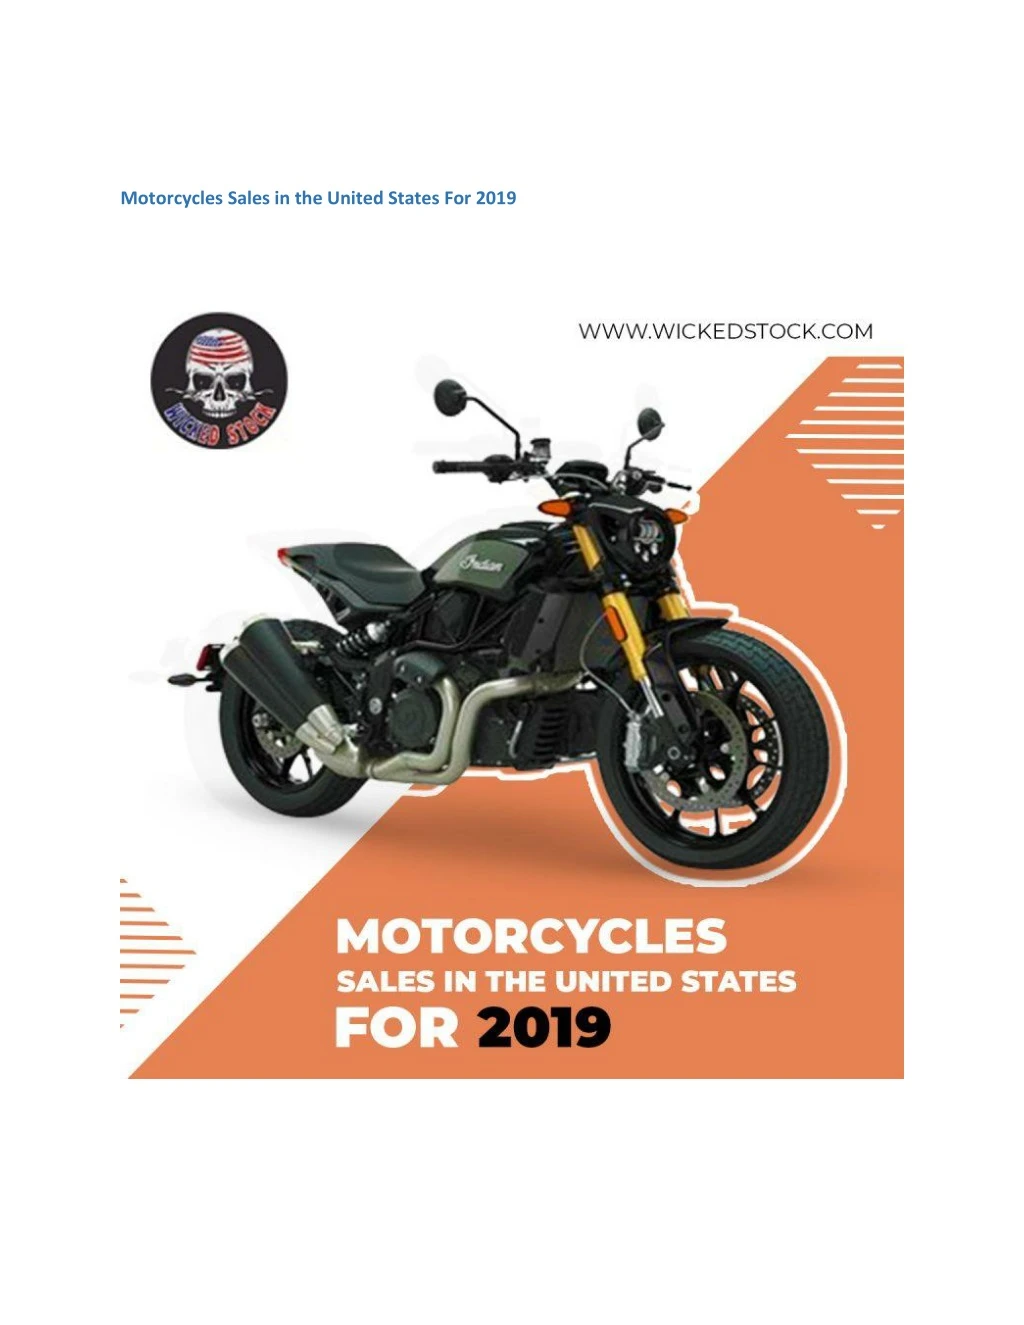 motorcycles sales in the united states for 2019